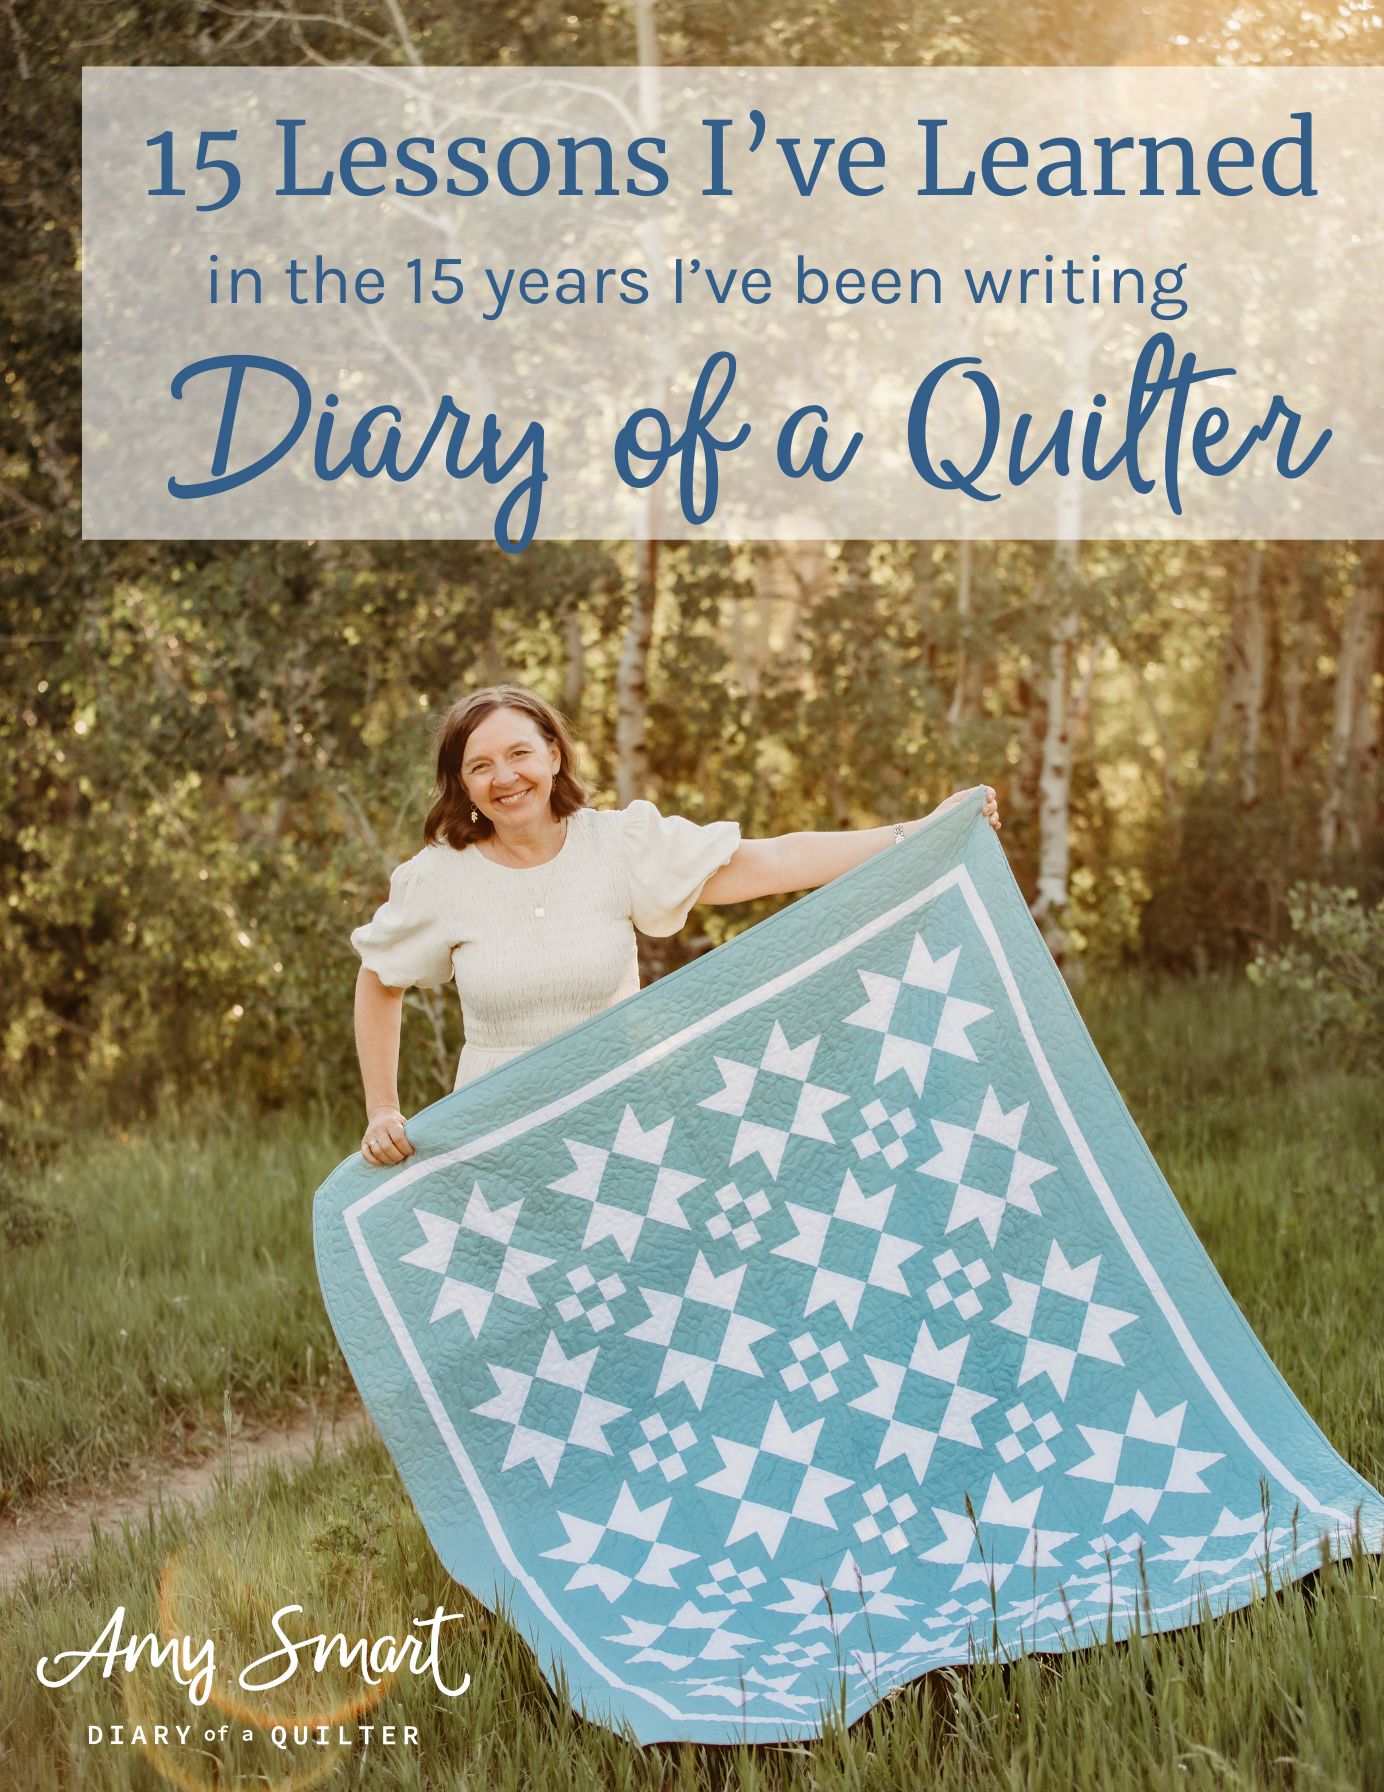 15 Lessons I've Learned in 15 Years of Diary of a Quilter - Diary of a